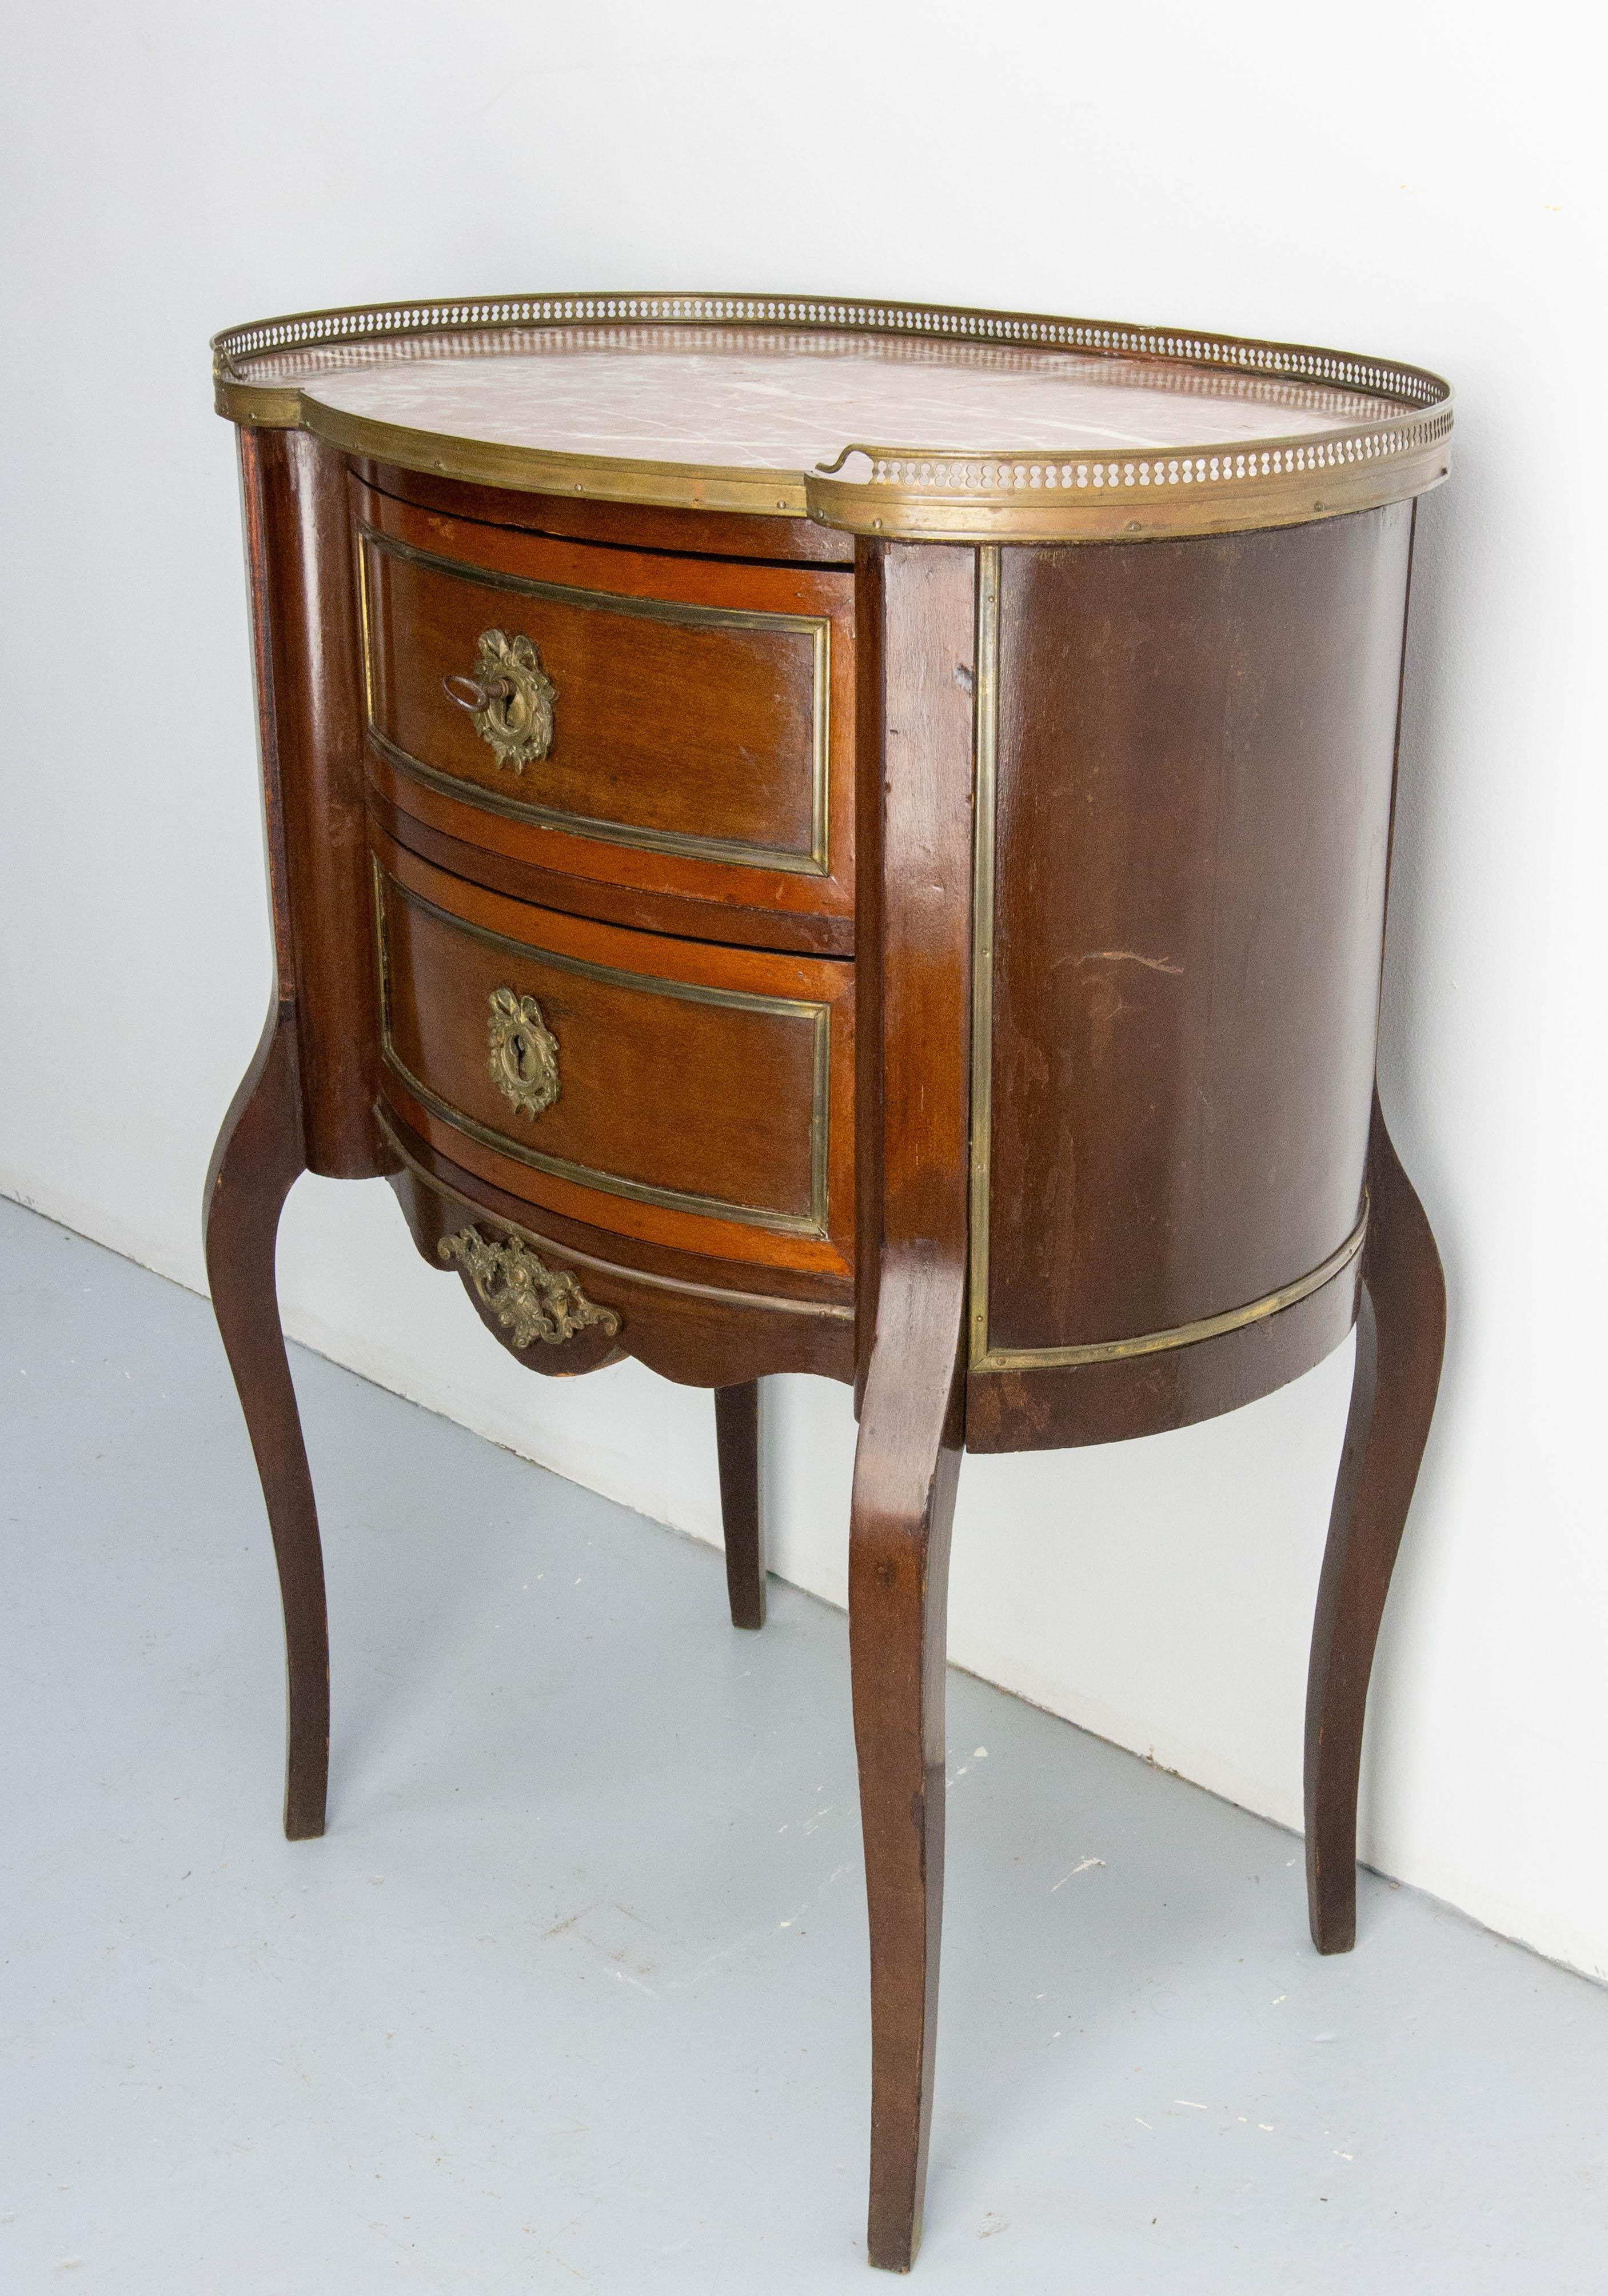 20th Century French Louis XV Kidney Style Iroko & Marble Top Little Chest of Drawers, c 1960 For Sale